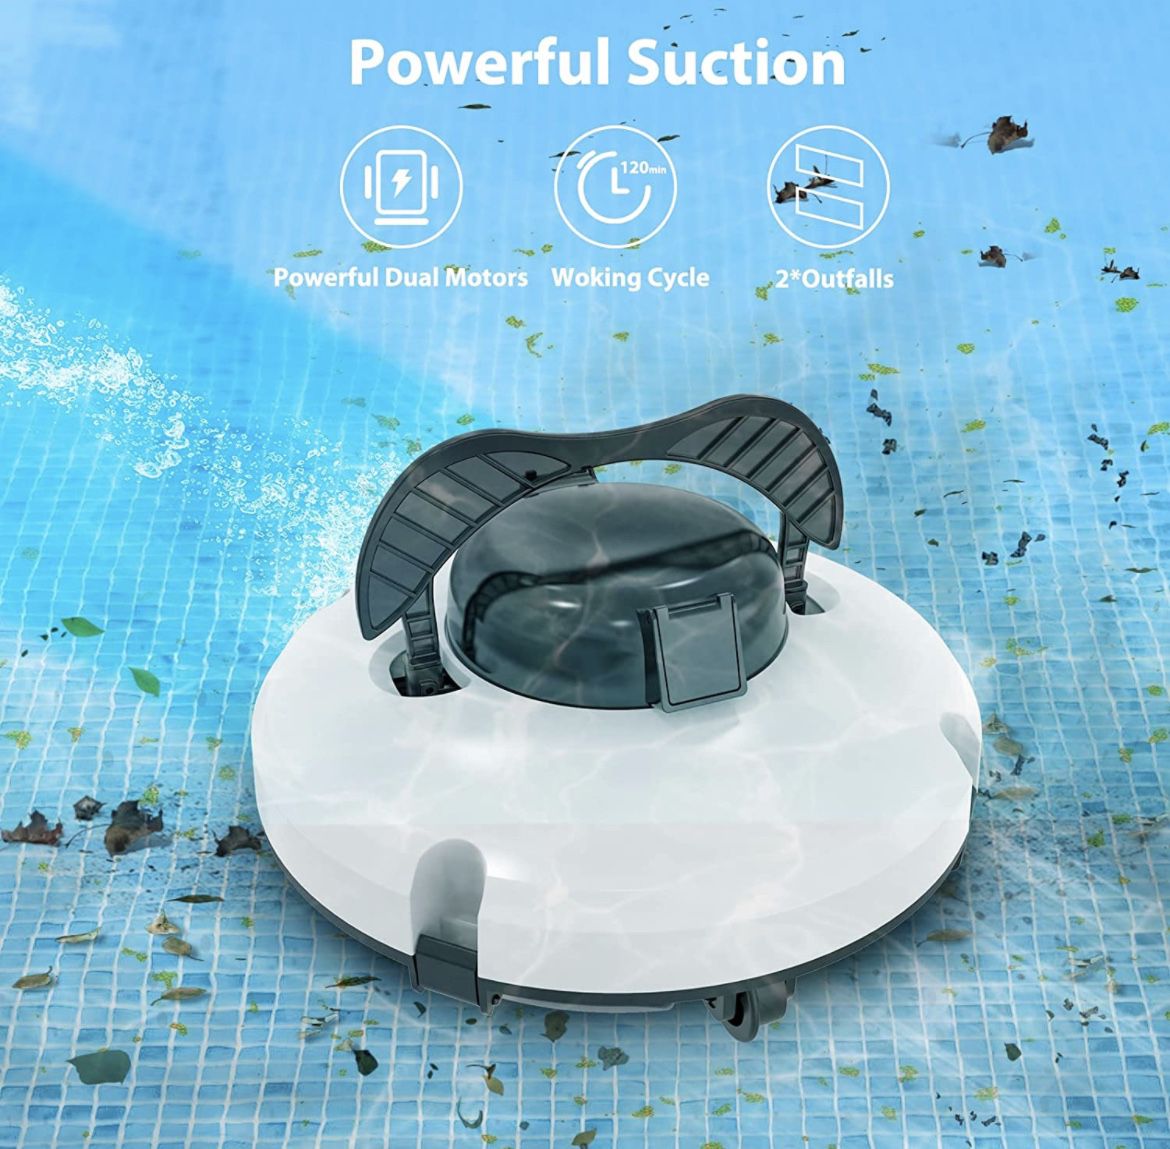 Cordless Robotic Pool Cleaner, Dual-Drive Motors, 180μm Fine Filter, for Pool Up to 650 Sq.Ft.